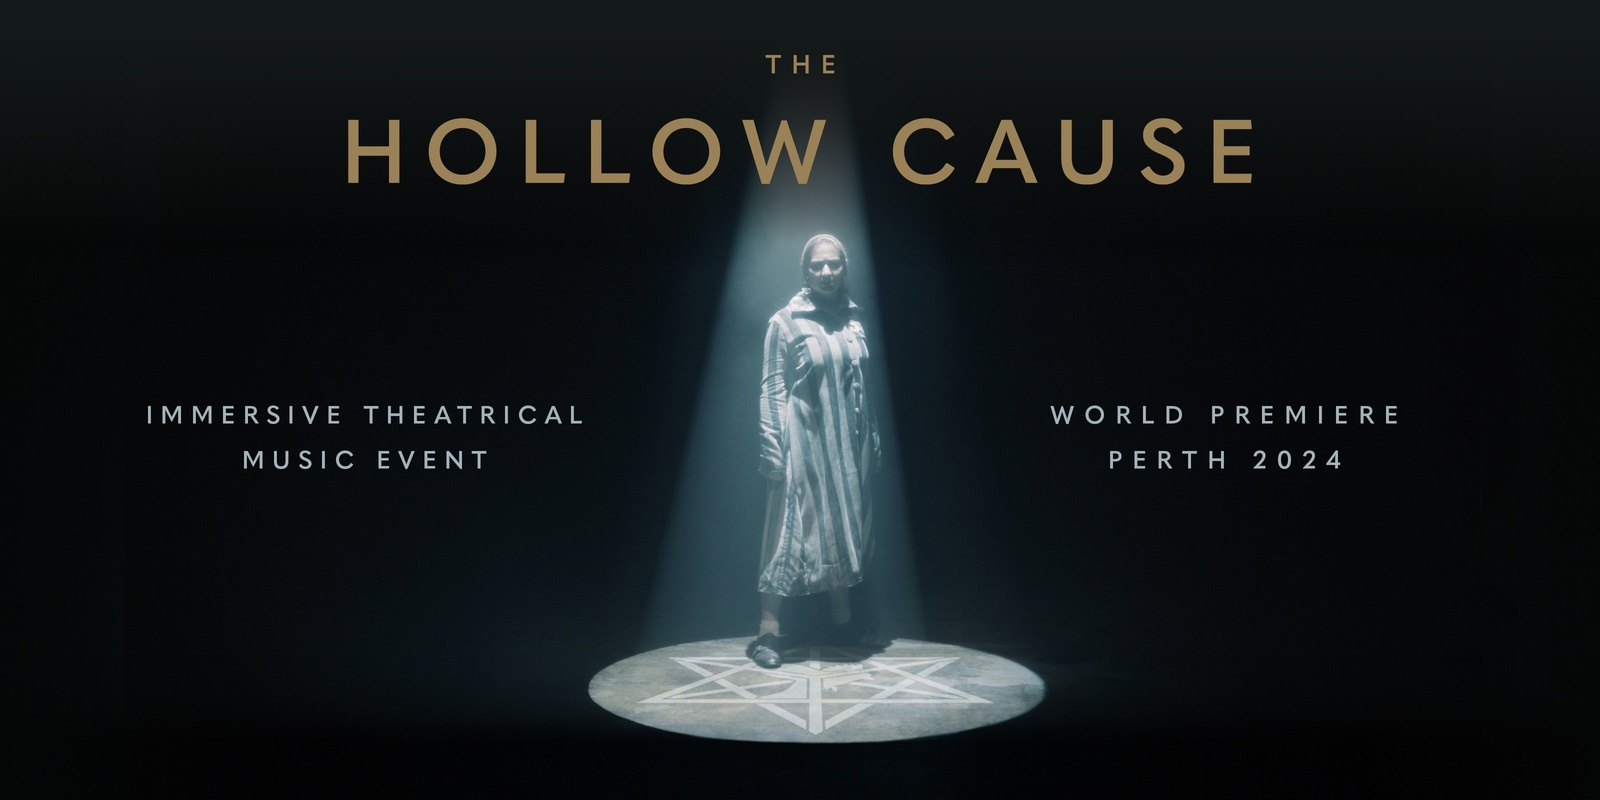 Banner image for The Hollow Cause - The Immersive Theatrical Music Event